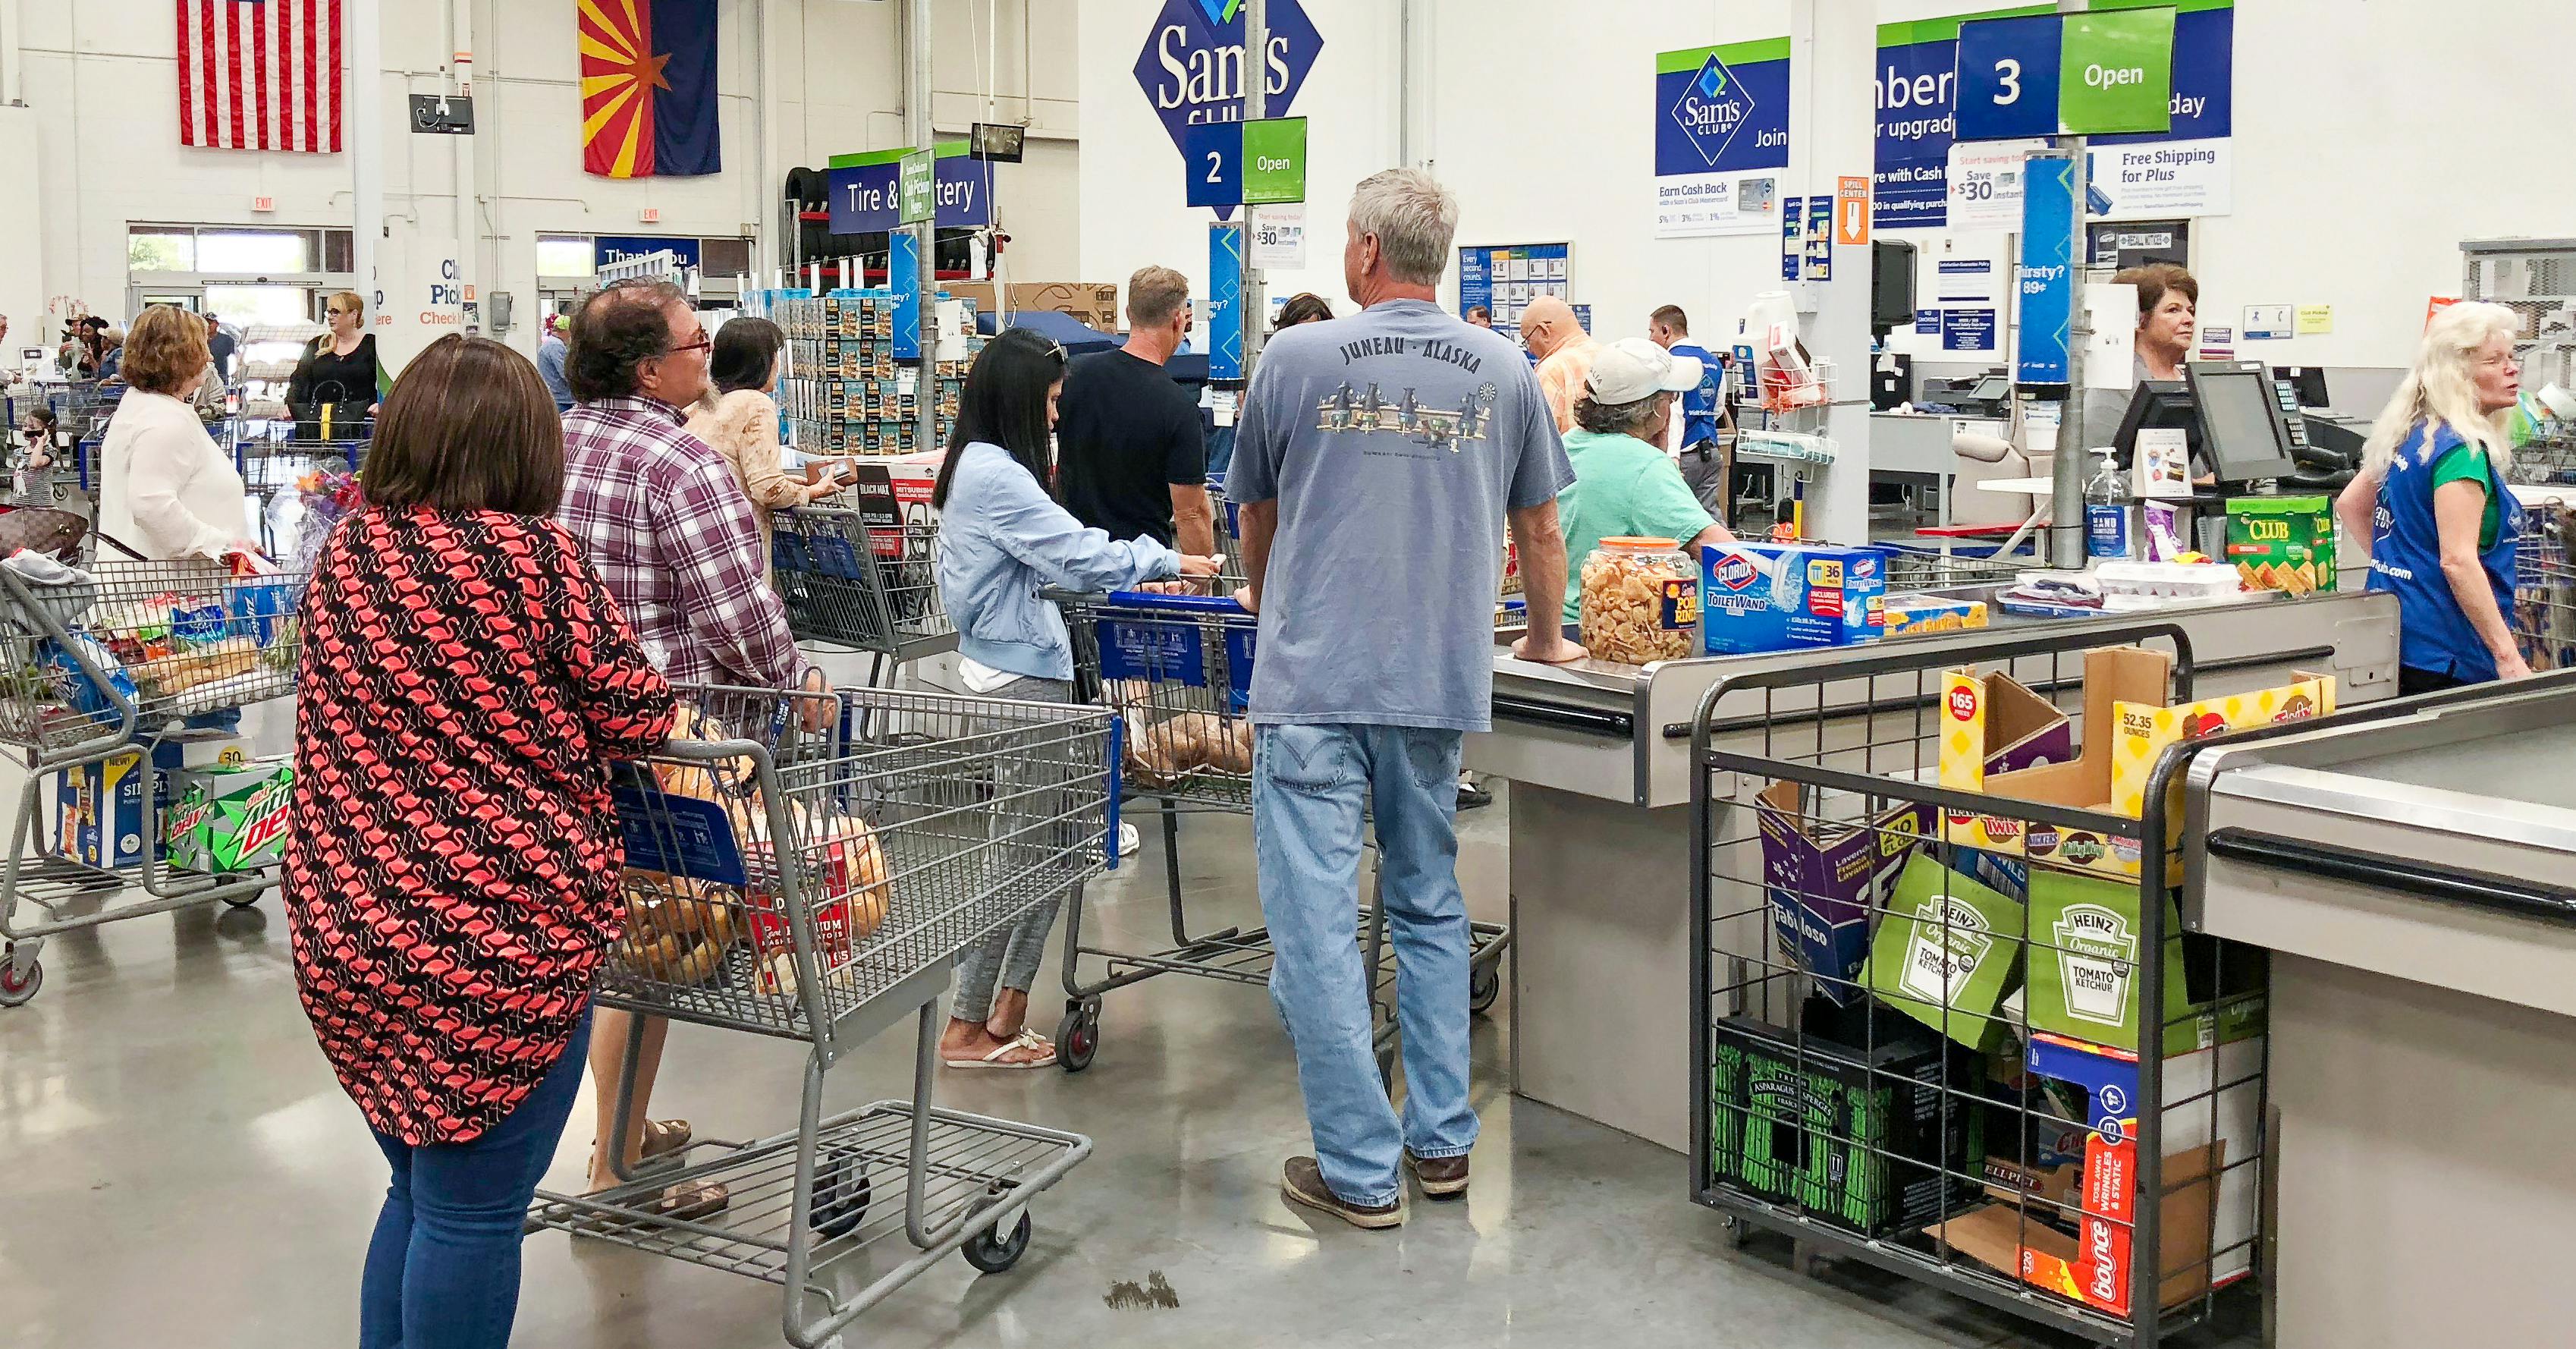 32 Tips For How To Shop at Sam's Club - The Krazy Coupon Lady